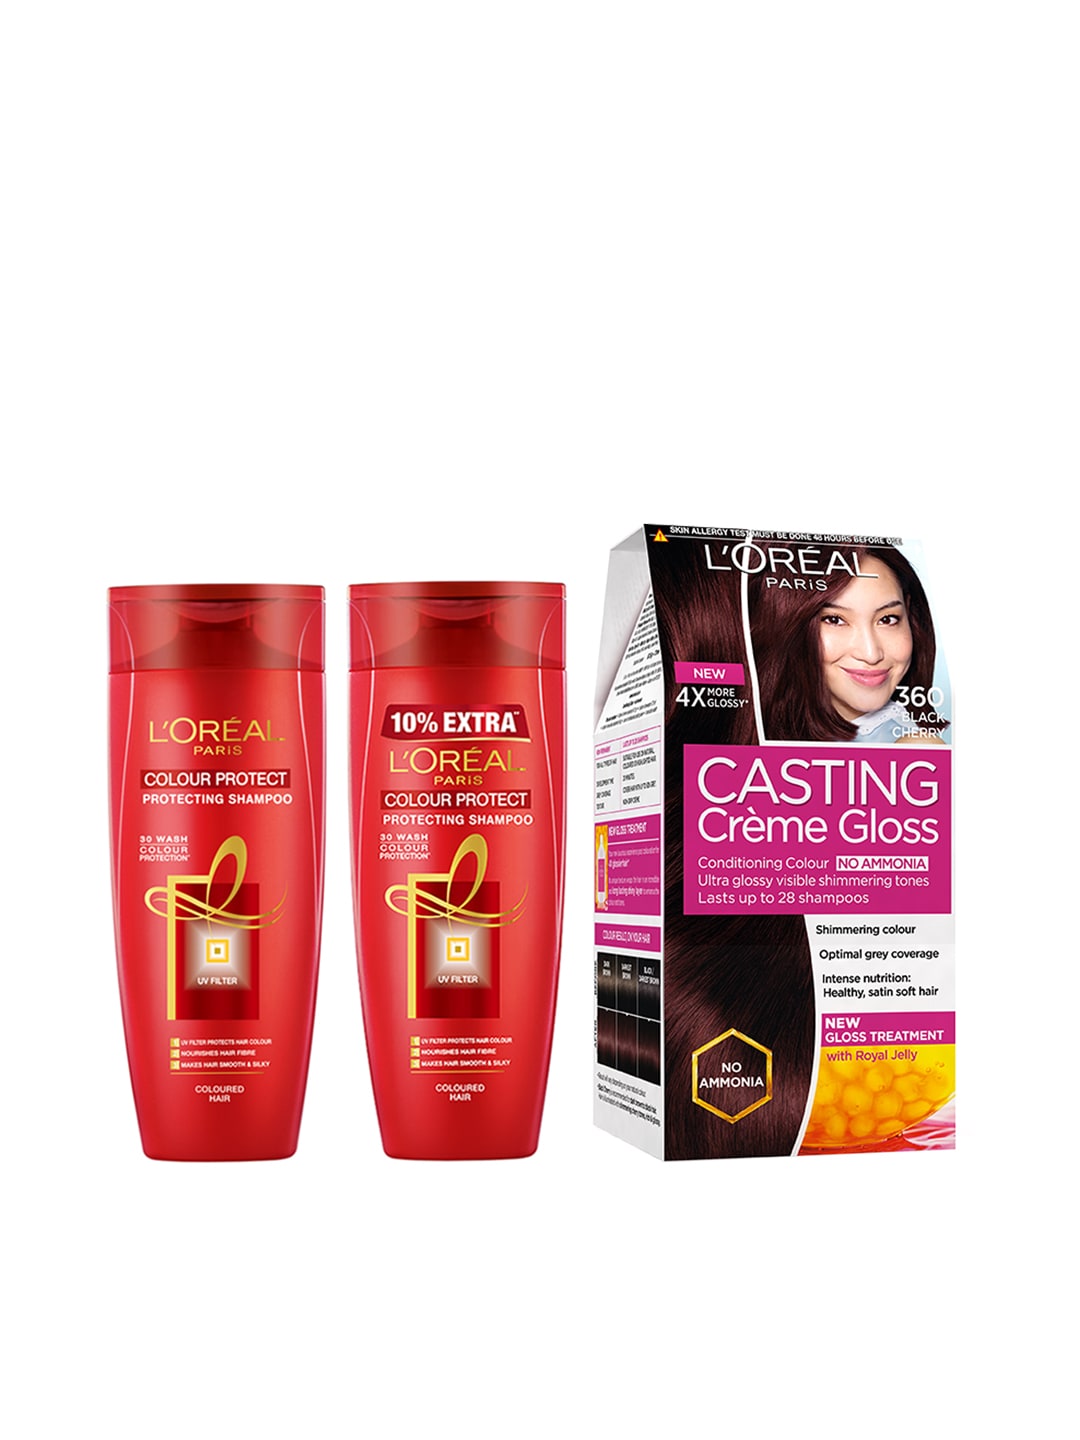 L'Oreal Paris Pack of 2 Colour Protect Shampoo & Casting Creme Gloss Hair Color - Black Price in India